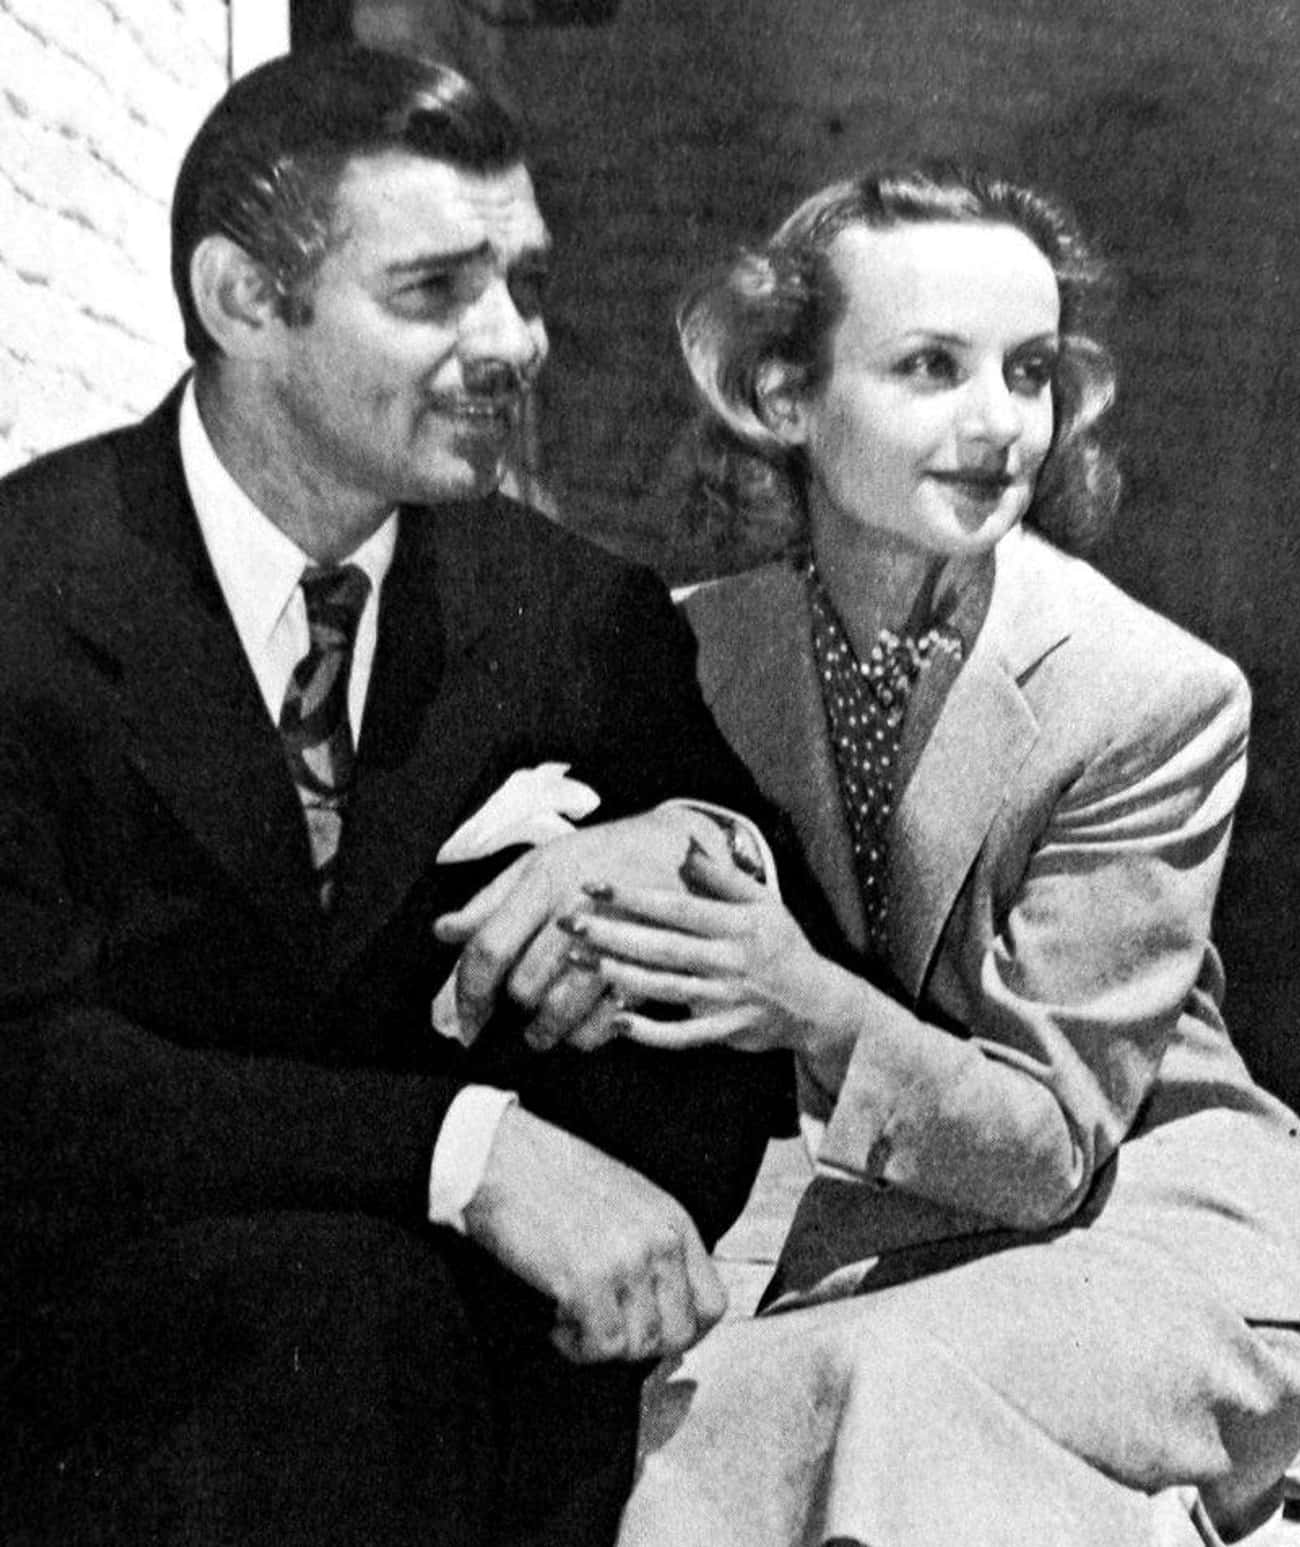 When His Wife Carole Lombard Died In A Plane Crash, Clark Gable Attempted To Scale A Mountain To Find Her